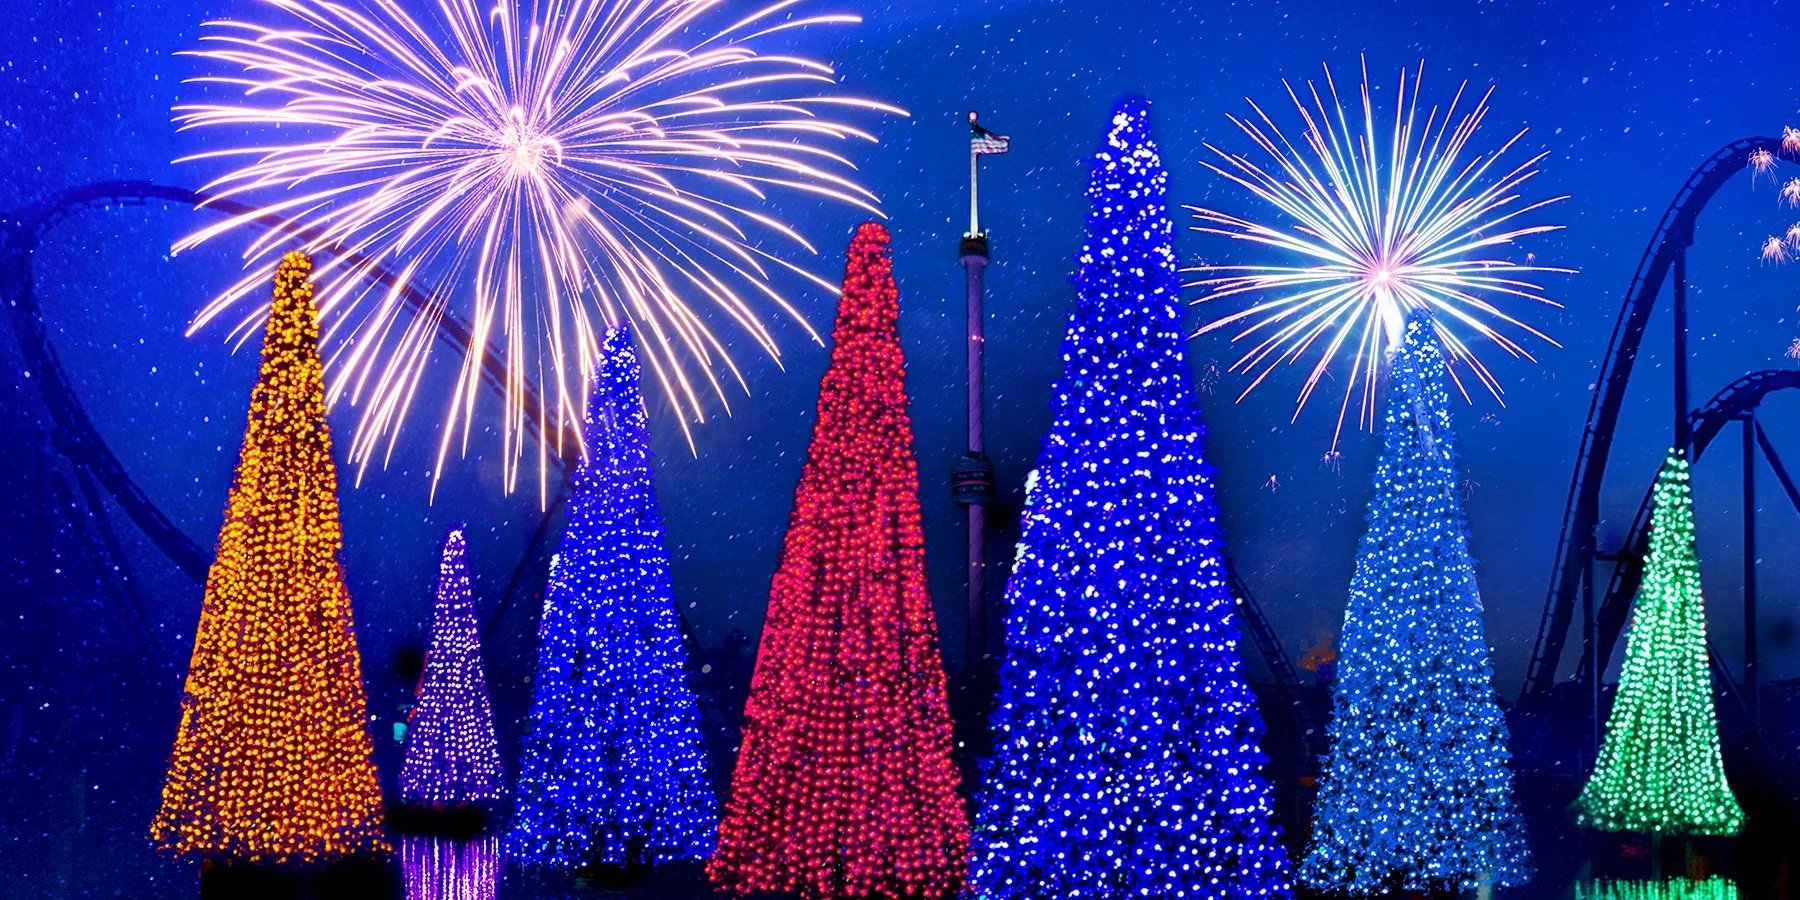 seaworld colorful christmas trees with blue background and fireworks